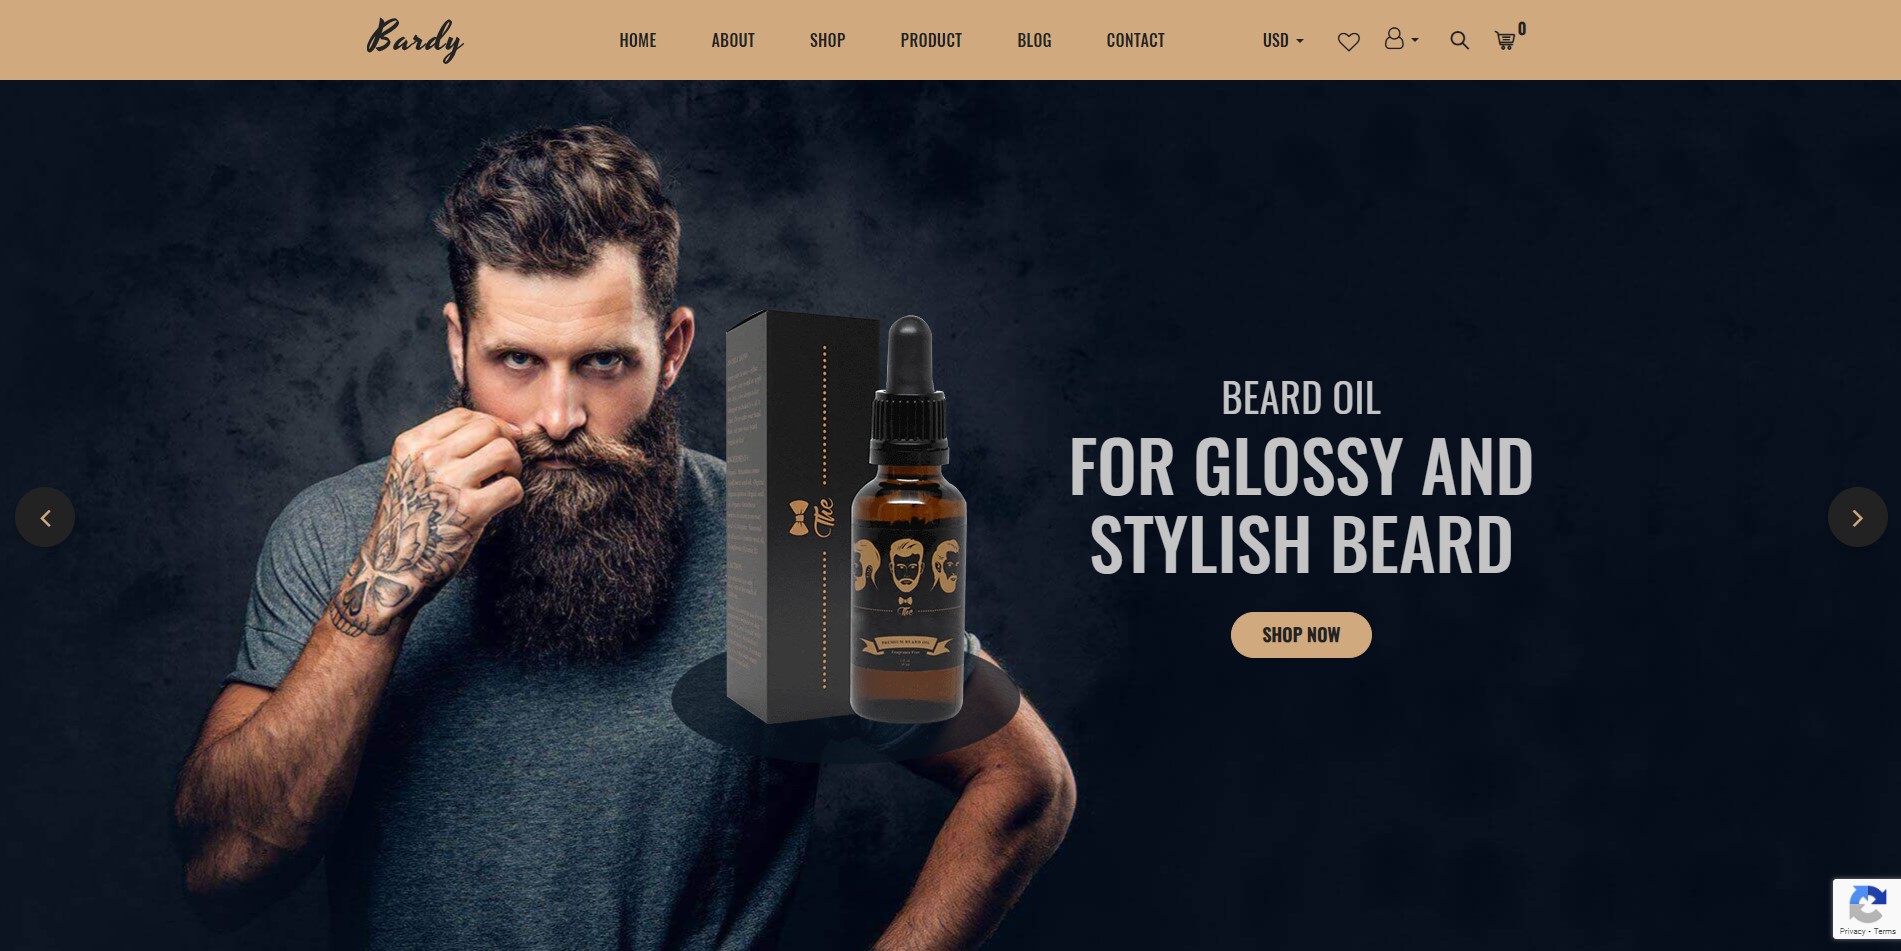 bardy-best-shopify-2-0-themes-barbershop